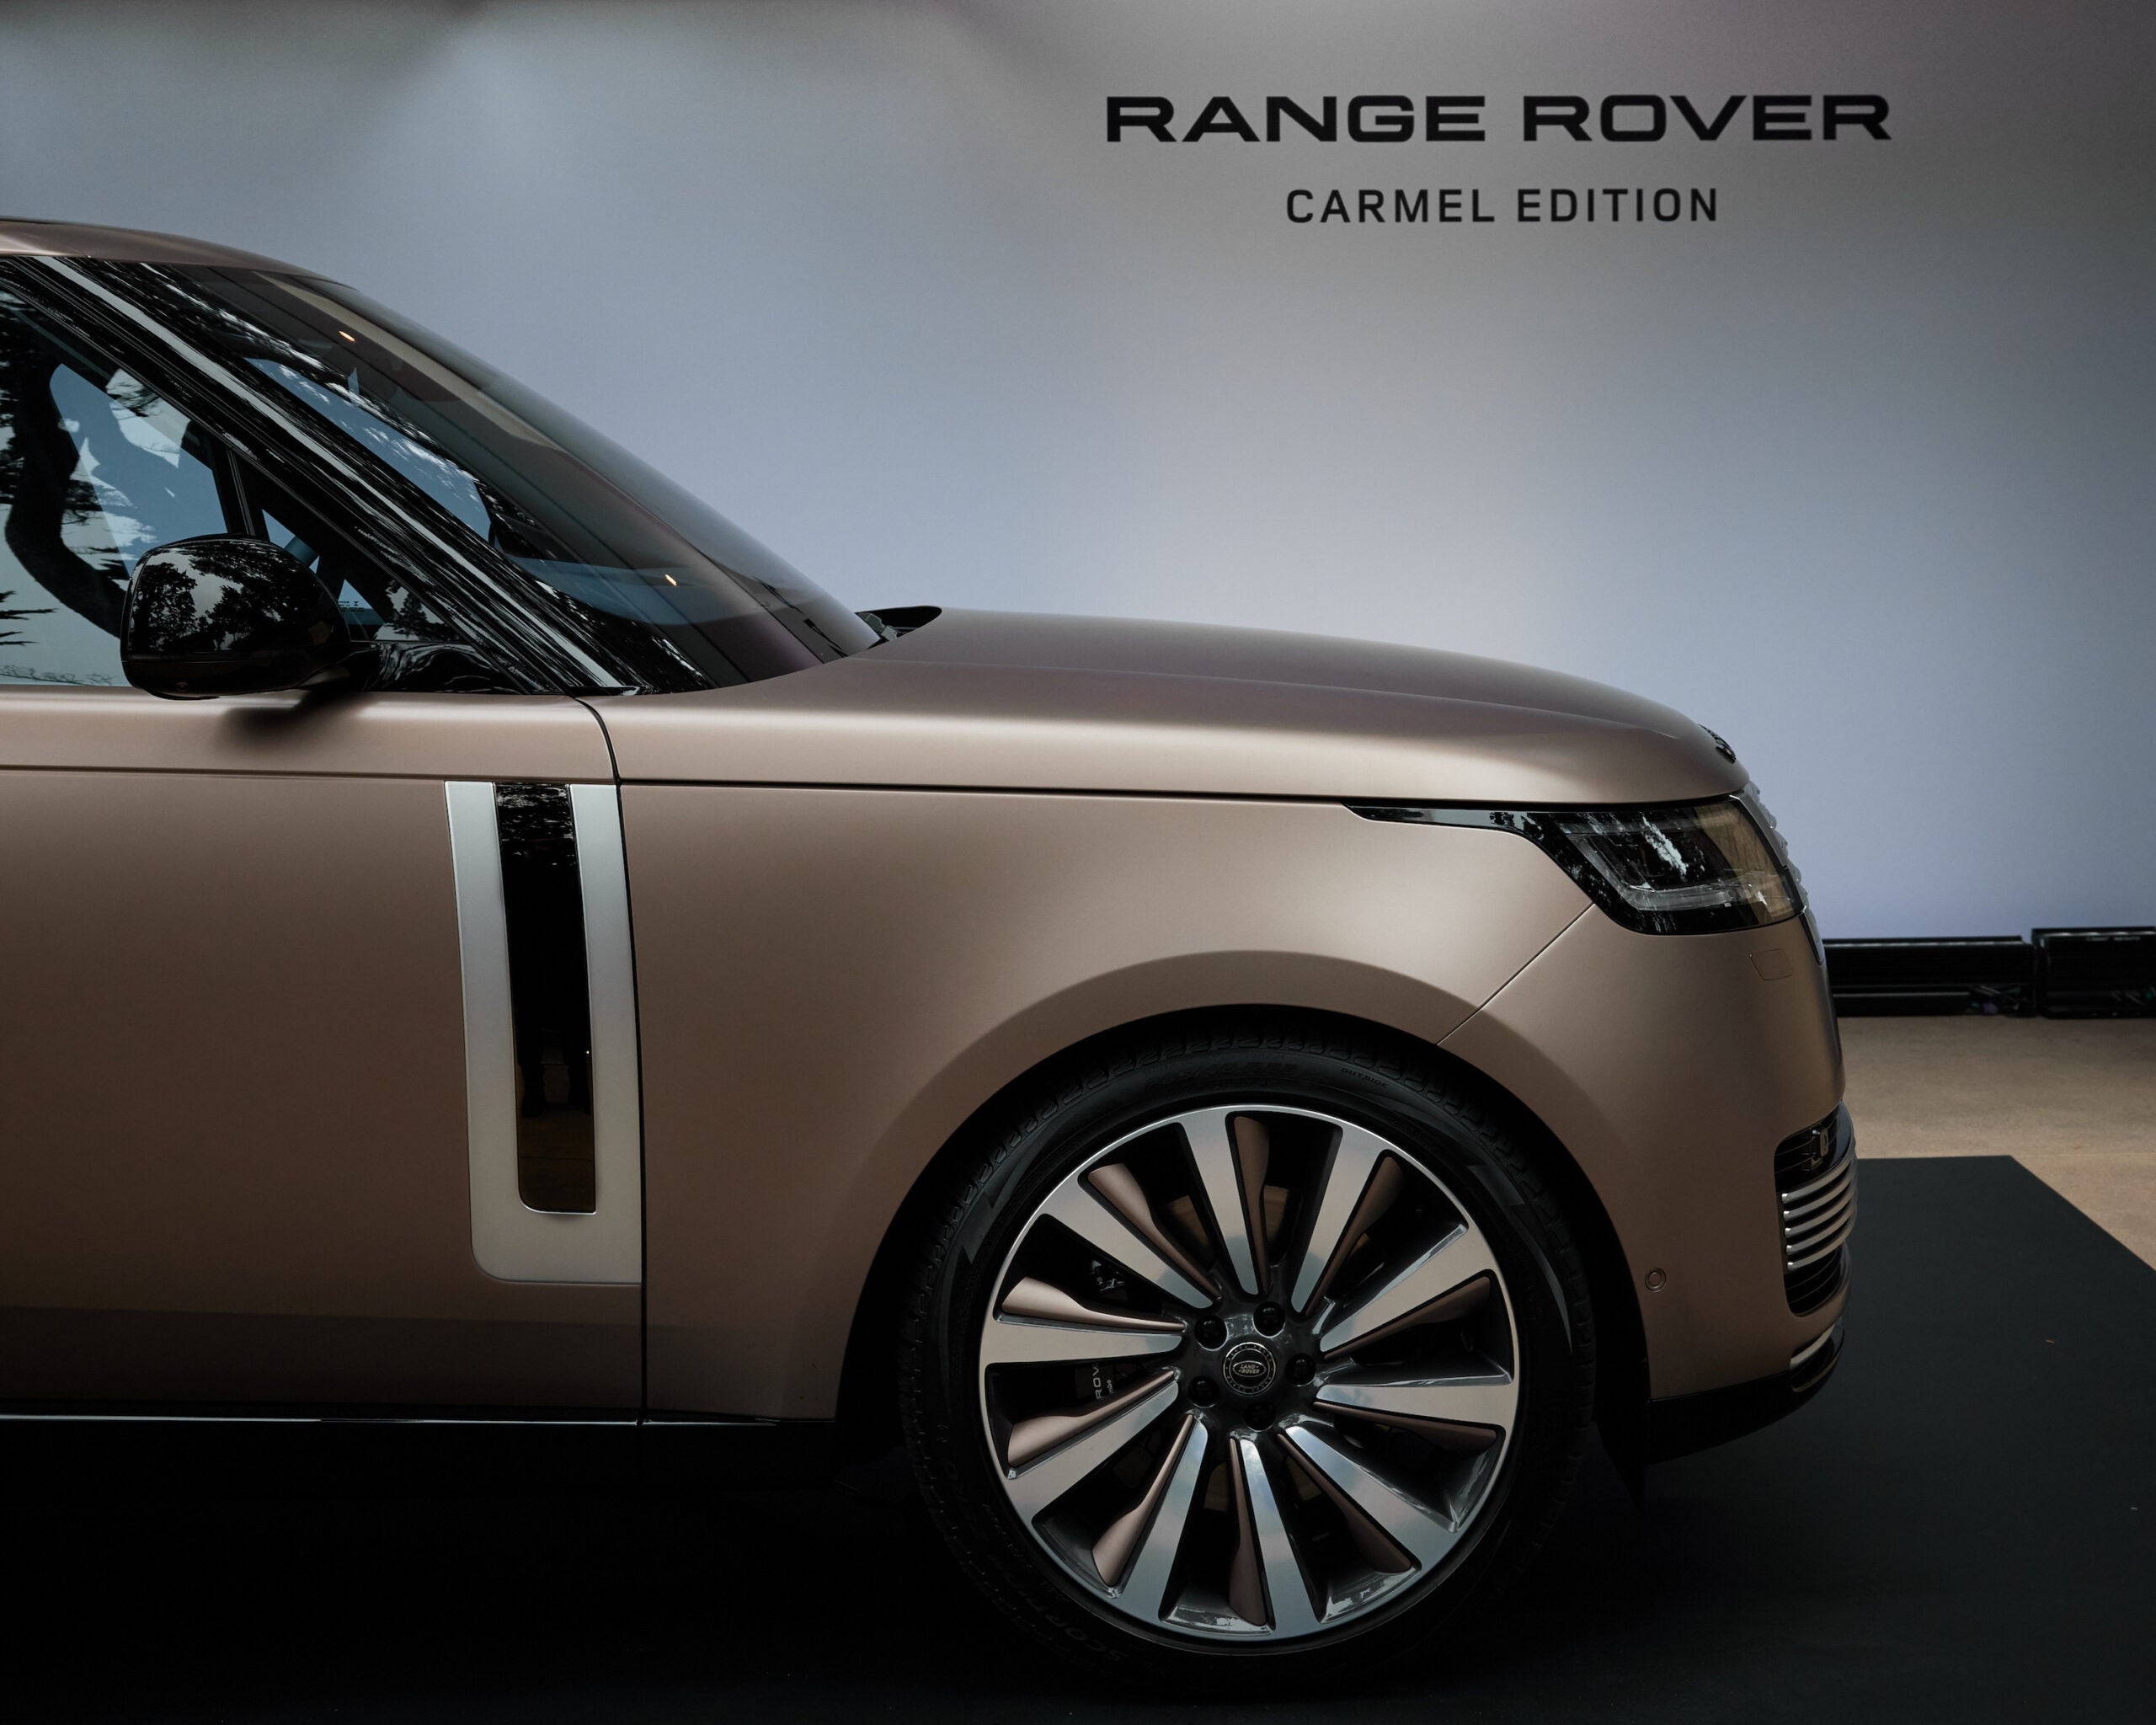 This Is How Ordinary a $346K Limited-Edition Range Rover SV Looks